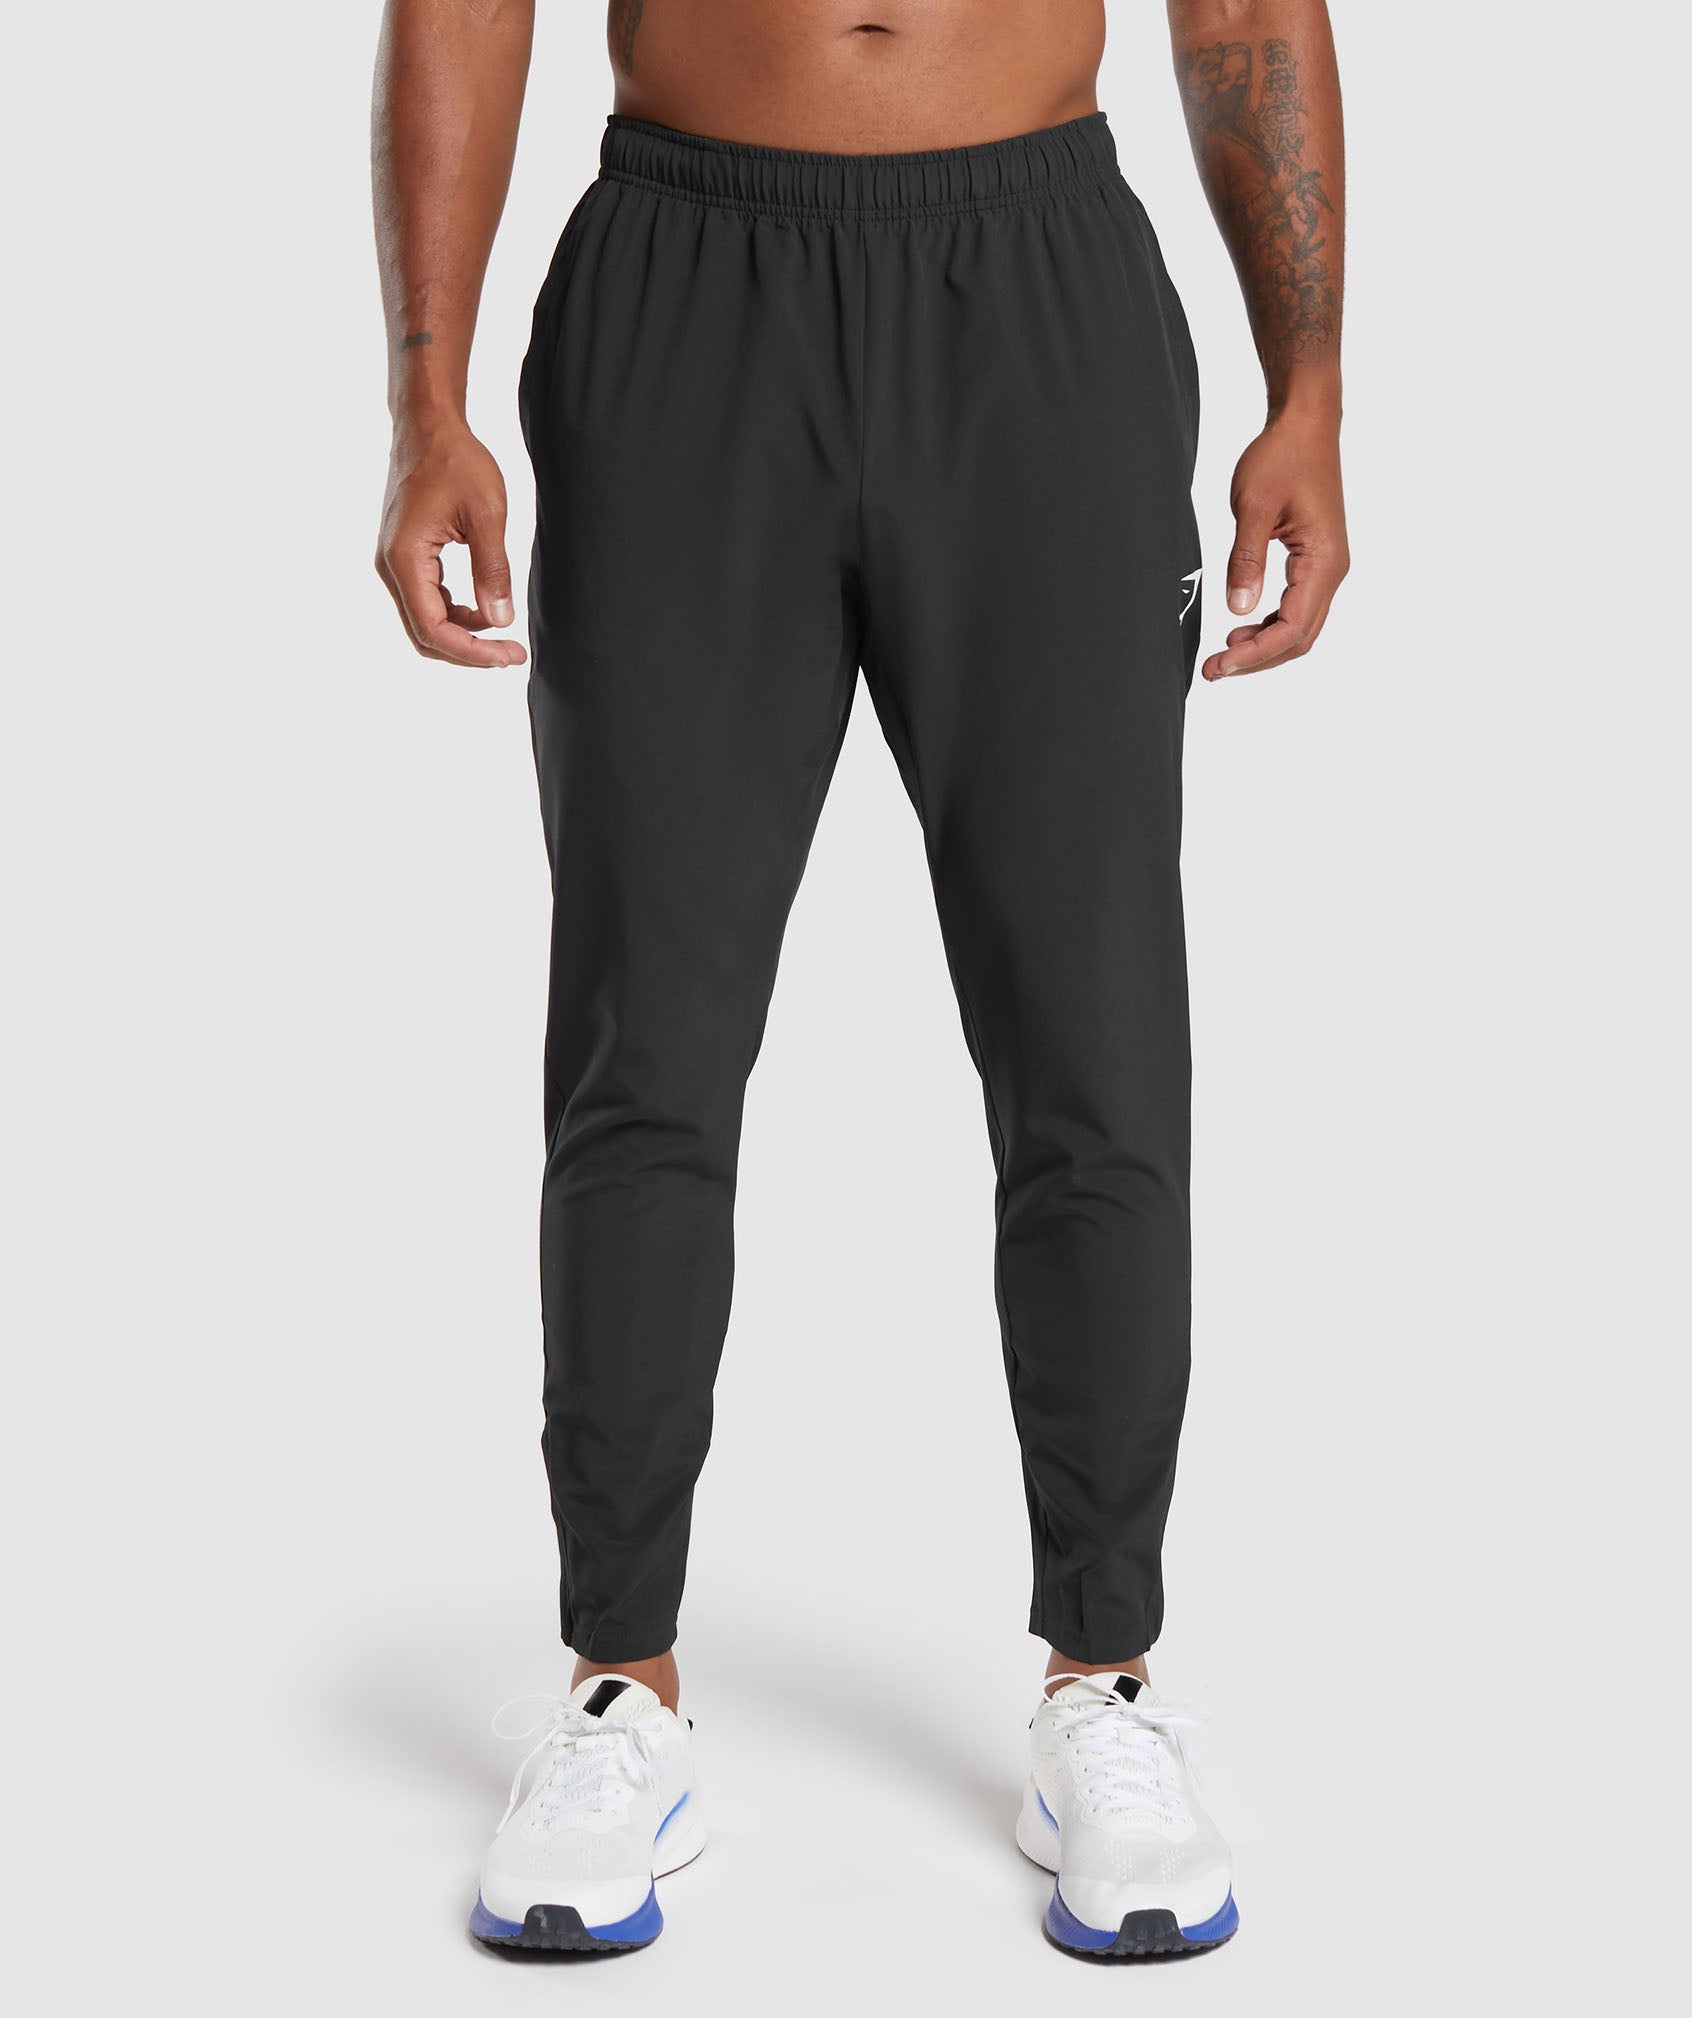 Arrival Woven Joggers in Black - view 1